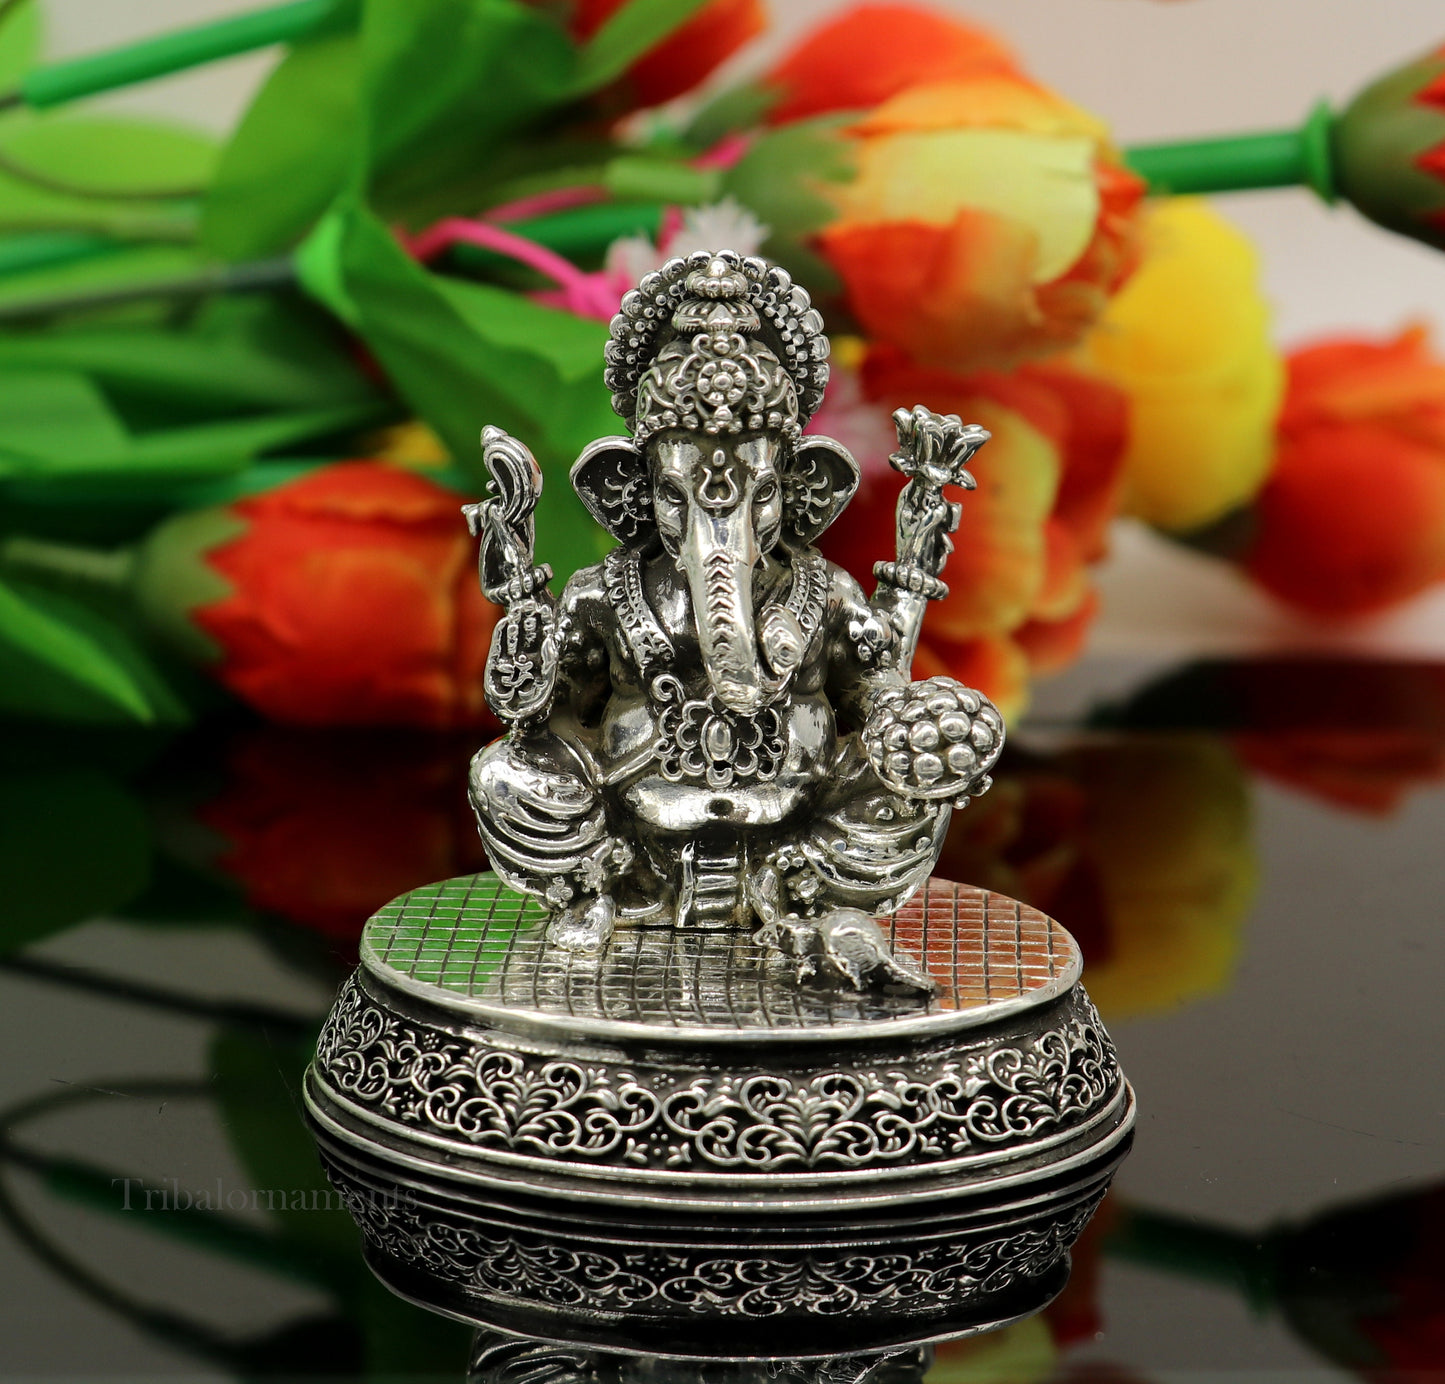 925 Sterling silver Lord Ganesh Idol, Pooja Articles, Silver Idols Figurine, handcrafted Lord Ganesh statue sculpture gifting art art218 - TRIBAL ORNAMENTS